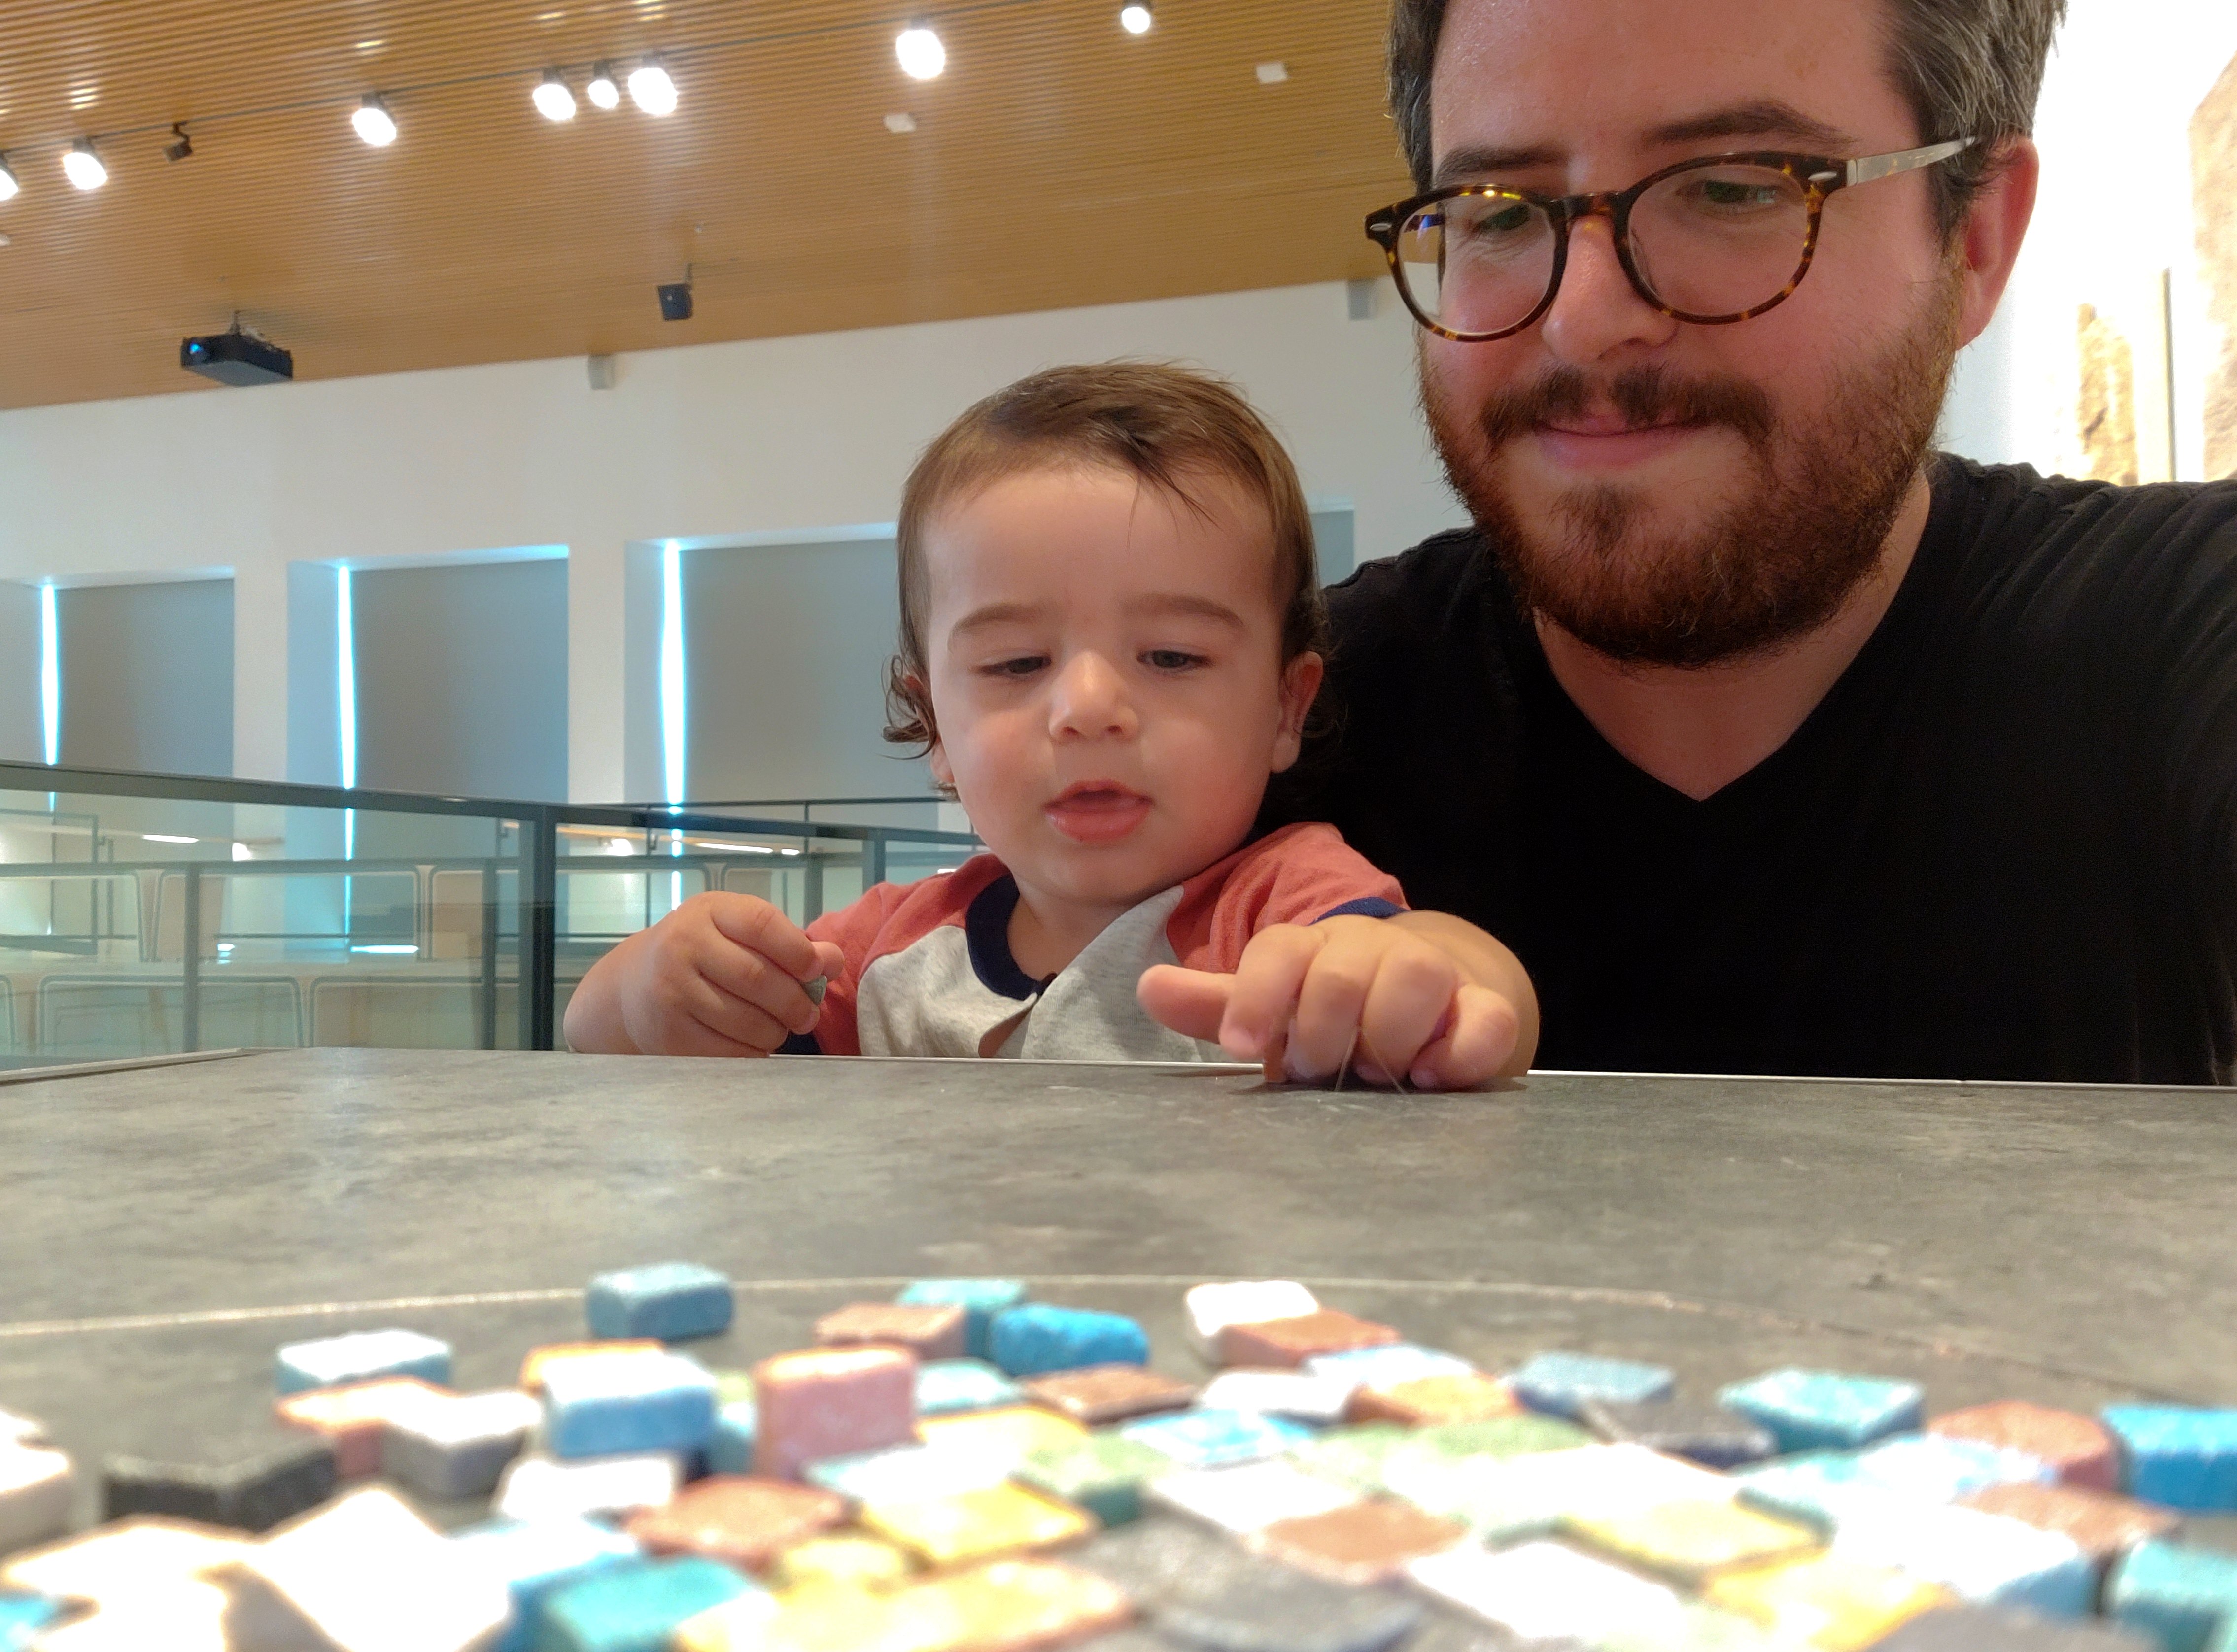 Amir playing with the mock mosaic tiles